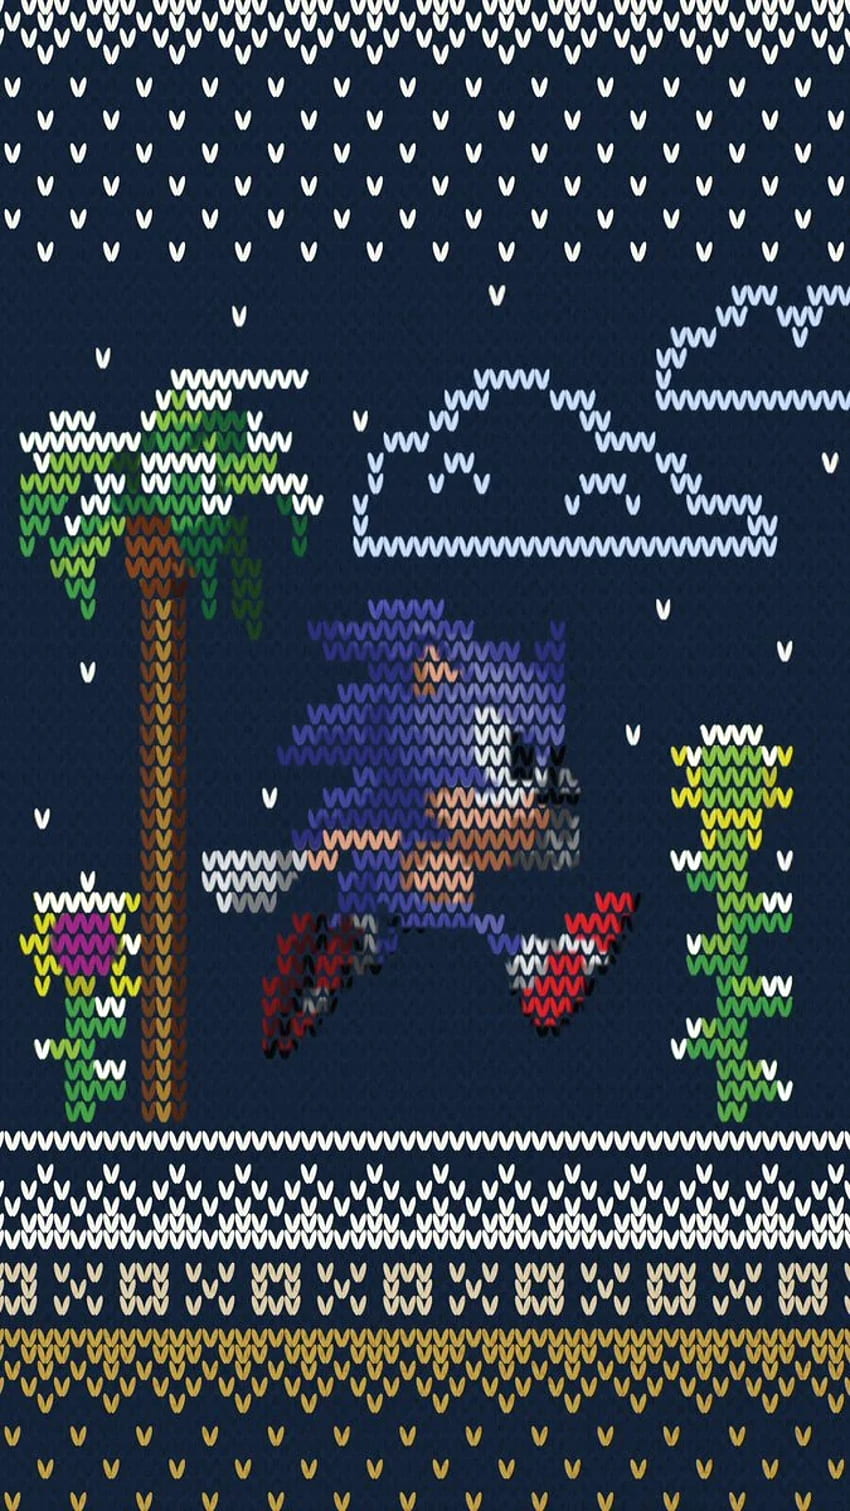 Sonic the Hedgehog - We made some wintry mobile to help you kick off the holiday season! HD phone wallpaper